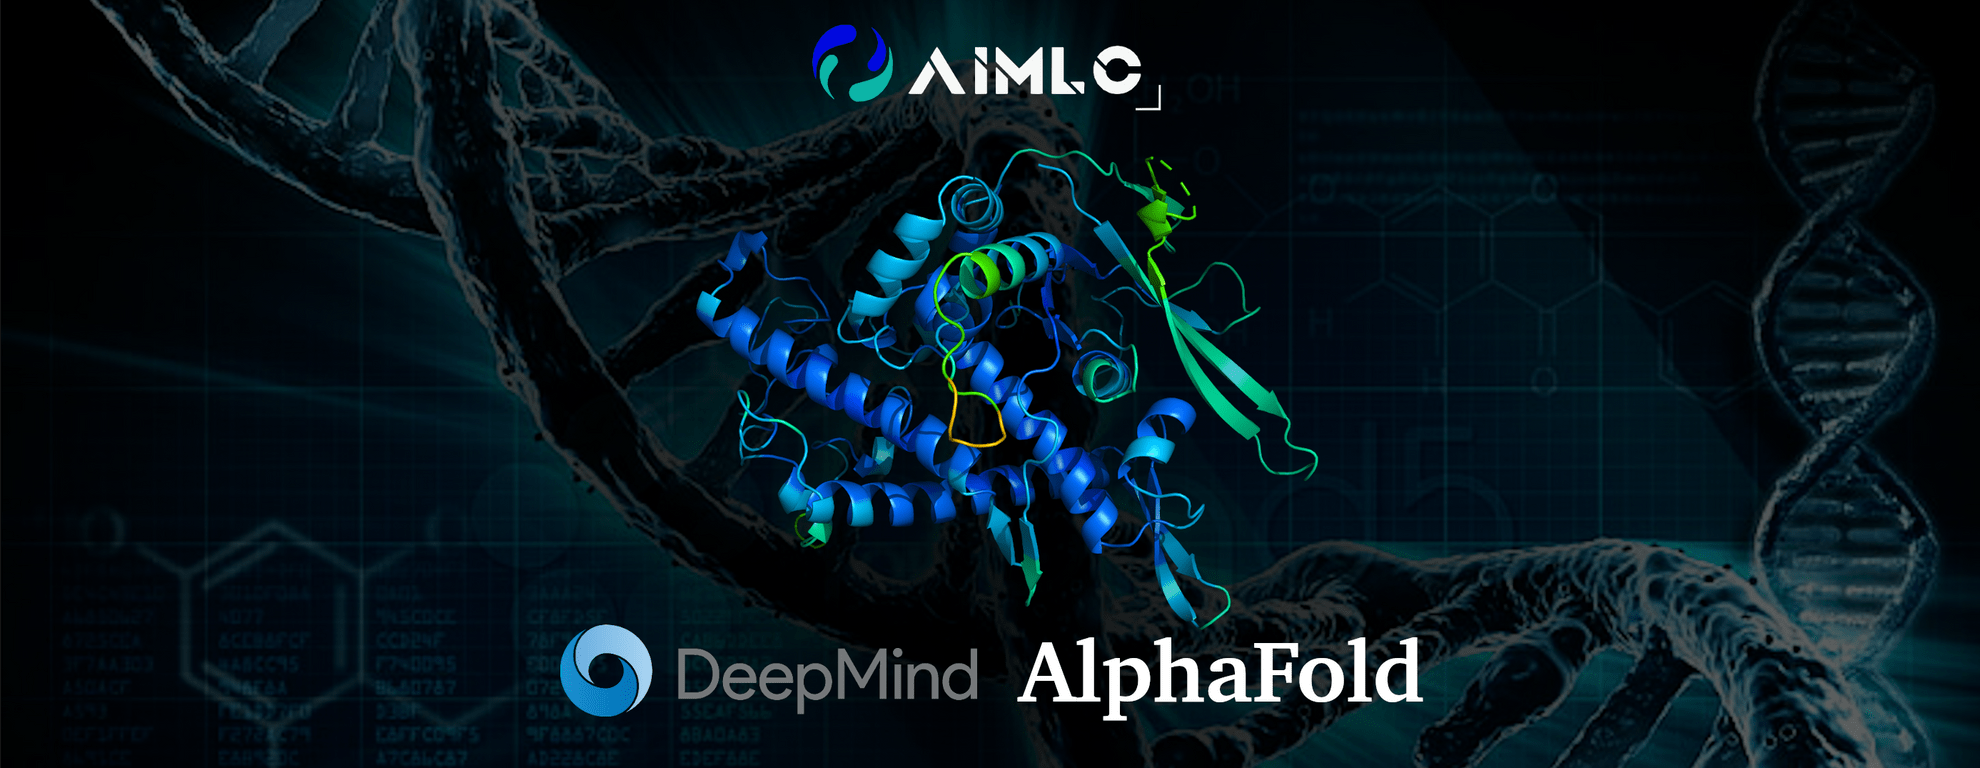 AlphaFold: Using AI to Solve Fundamental Scientific Problems - Featured image